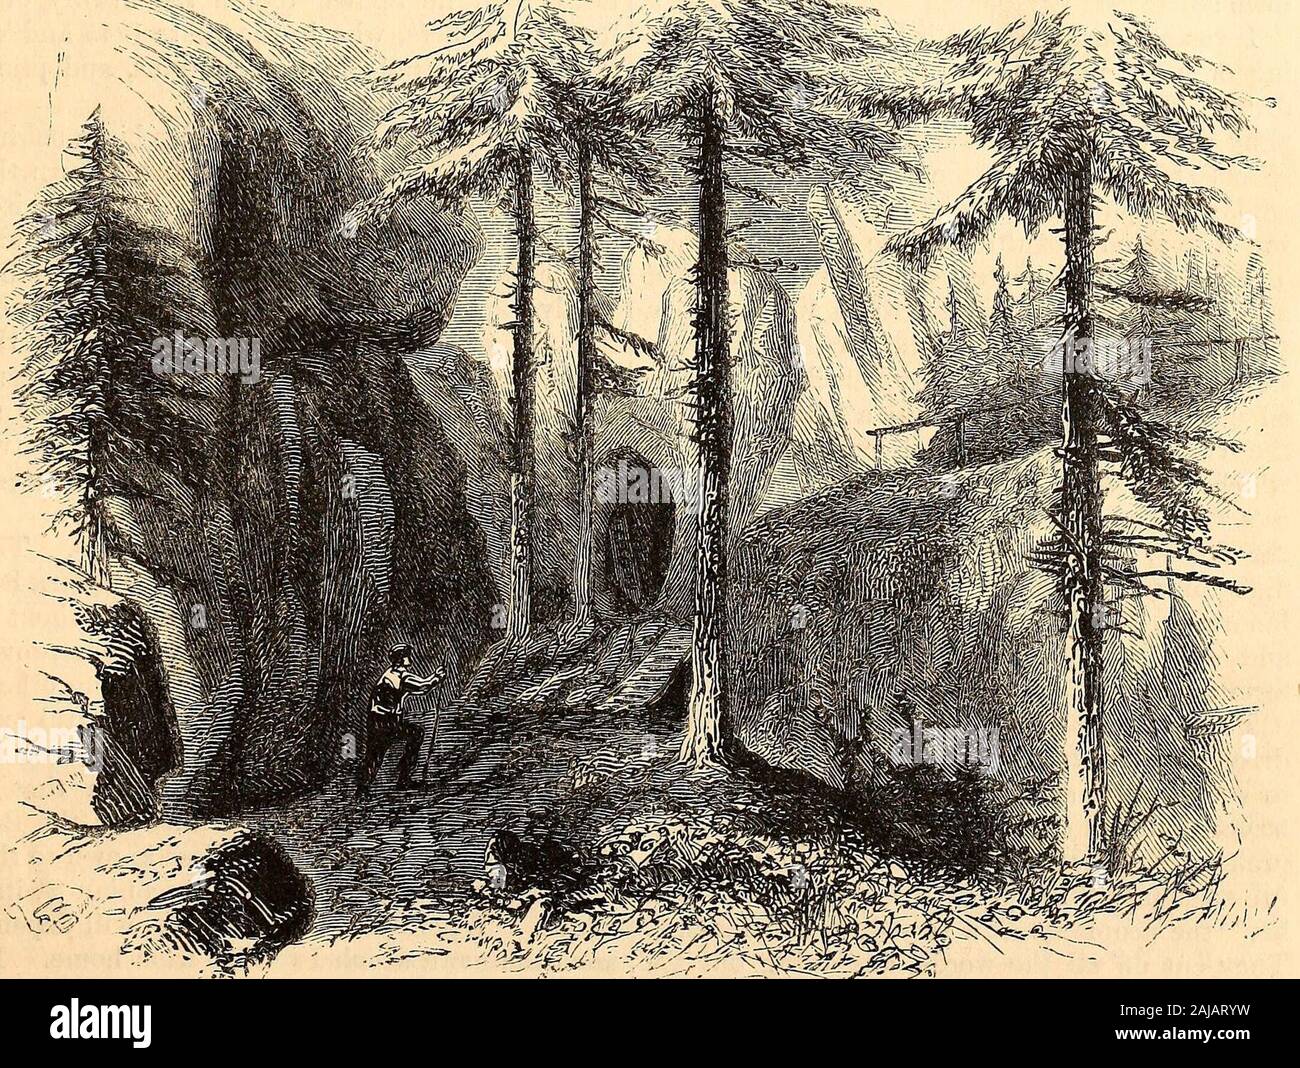 Harper's new monthly magazine . lue Bohemian mountains, and, tothe west, on all the dark summits of the Fich-telgebirge. The villages shone white and redin the sun; the meadow-ponds were sapphiresset in emerald, and the dark-purple tint of theforests mottled the general golden-green lustreof the landscape. A quarter of an hour furtheris the Haberstein, a wonderful up-building ofrock, forming a double tower, from eighty to ahundred feet high. On returning to Wunsiedel I did not neglectto visit Jean Pauls birth-place—a plain, sub-stantial house, adjoining the church. Here thestreet forms a small Stock Photo